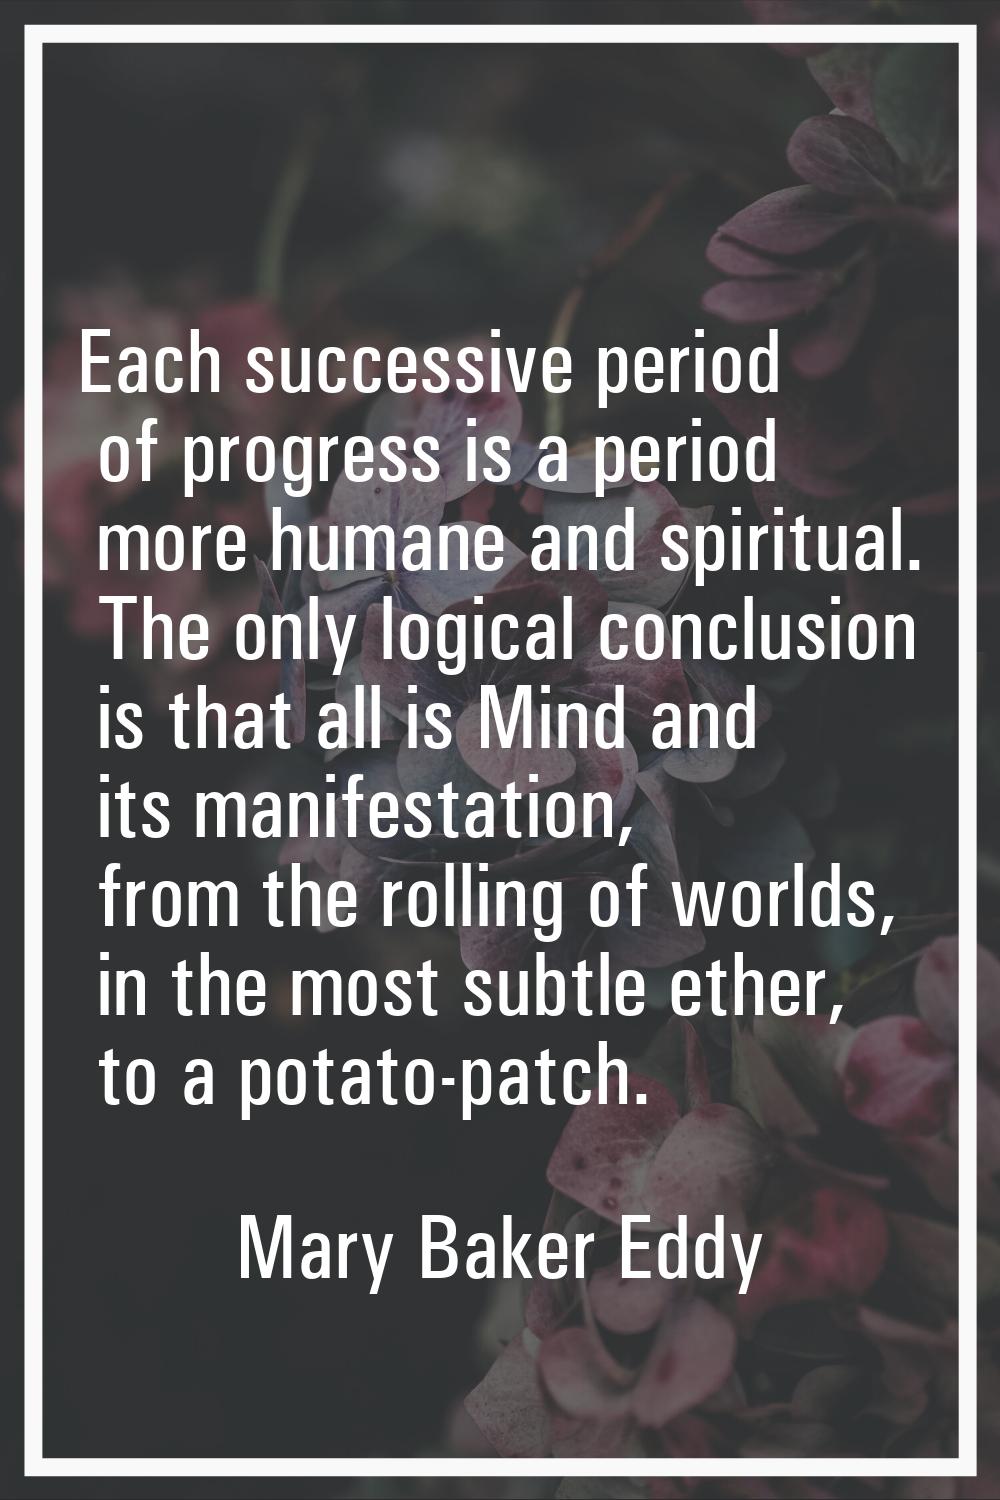 Each successive period of progress is a period more humane and spiritual. The only logical conclusi